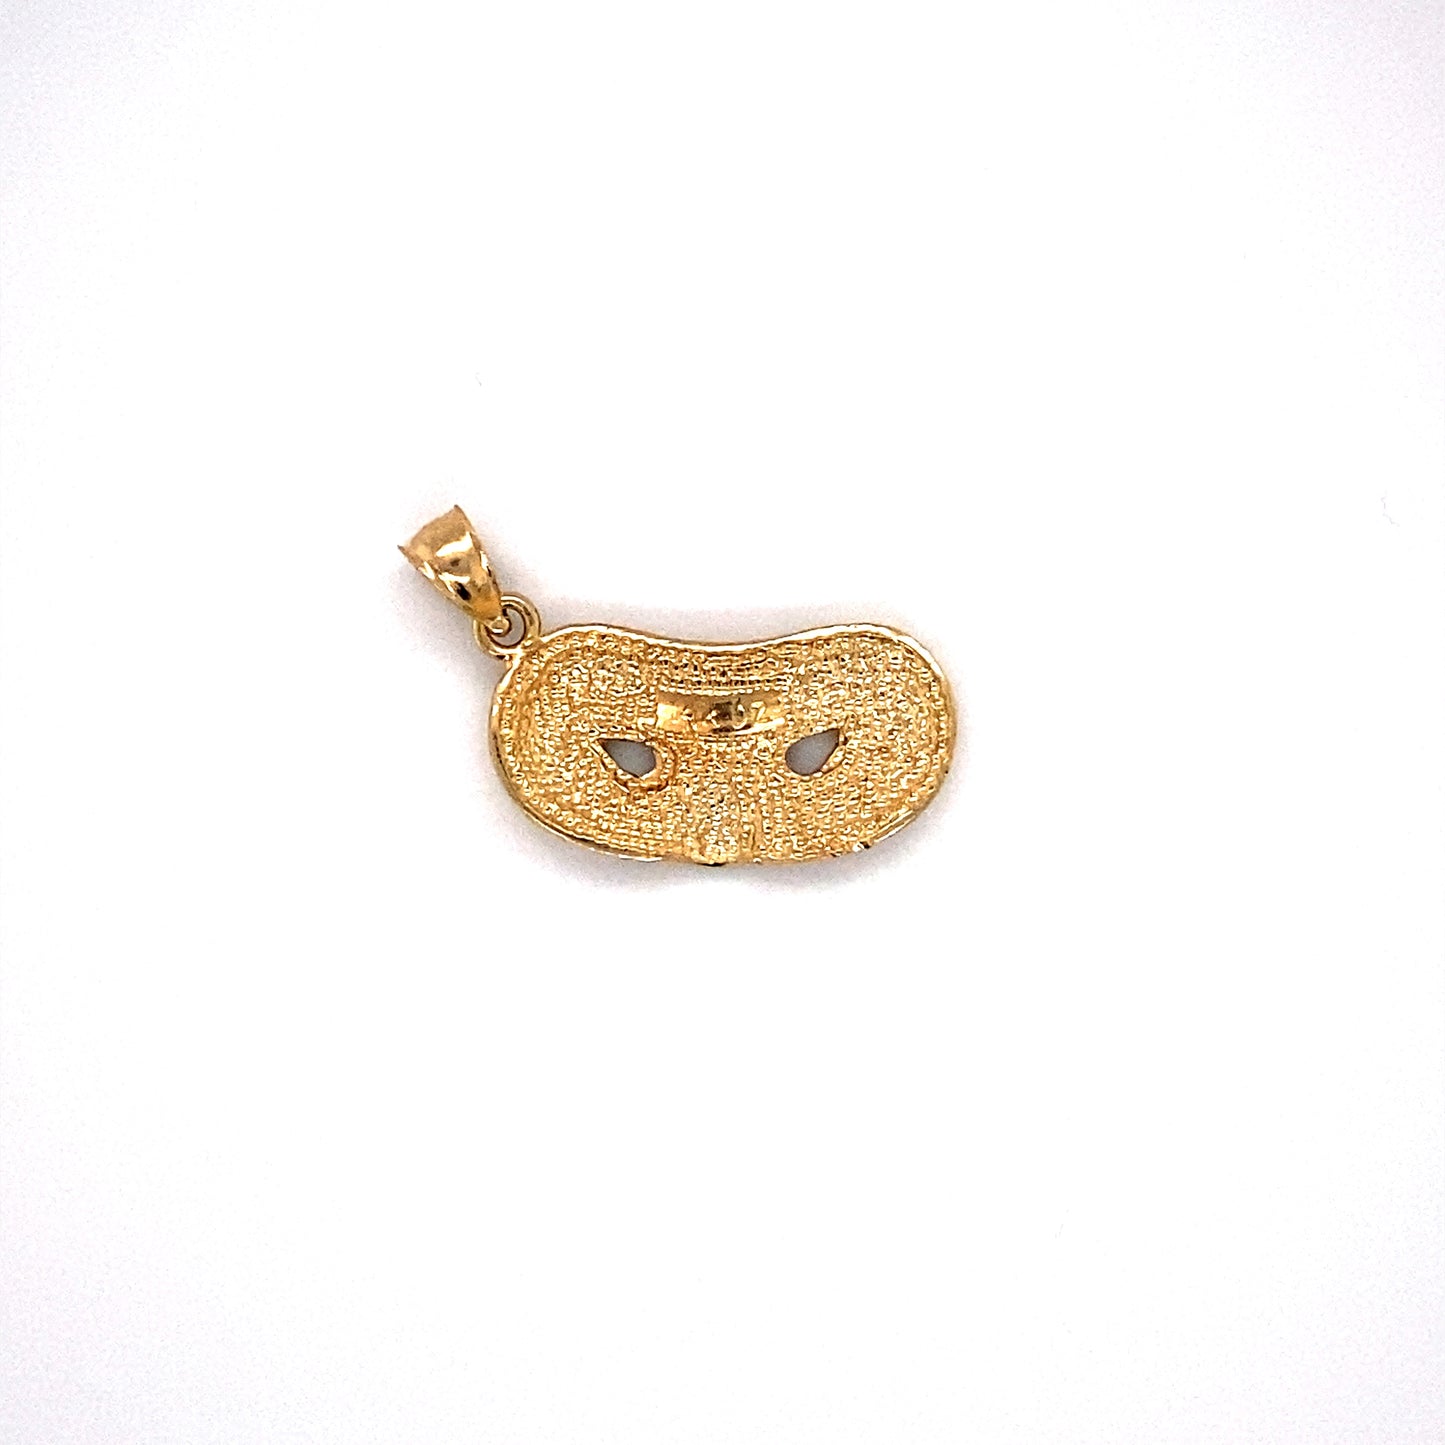 Vintage Masquerade Mask Charm in 14K Gold